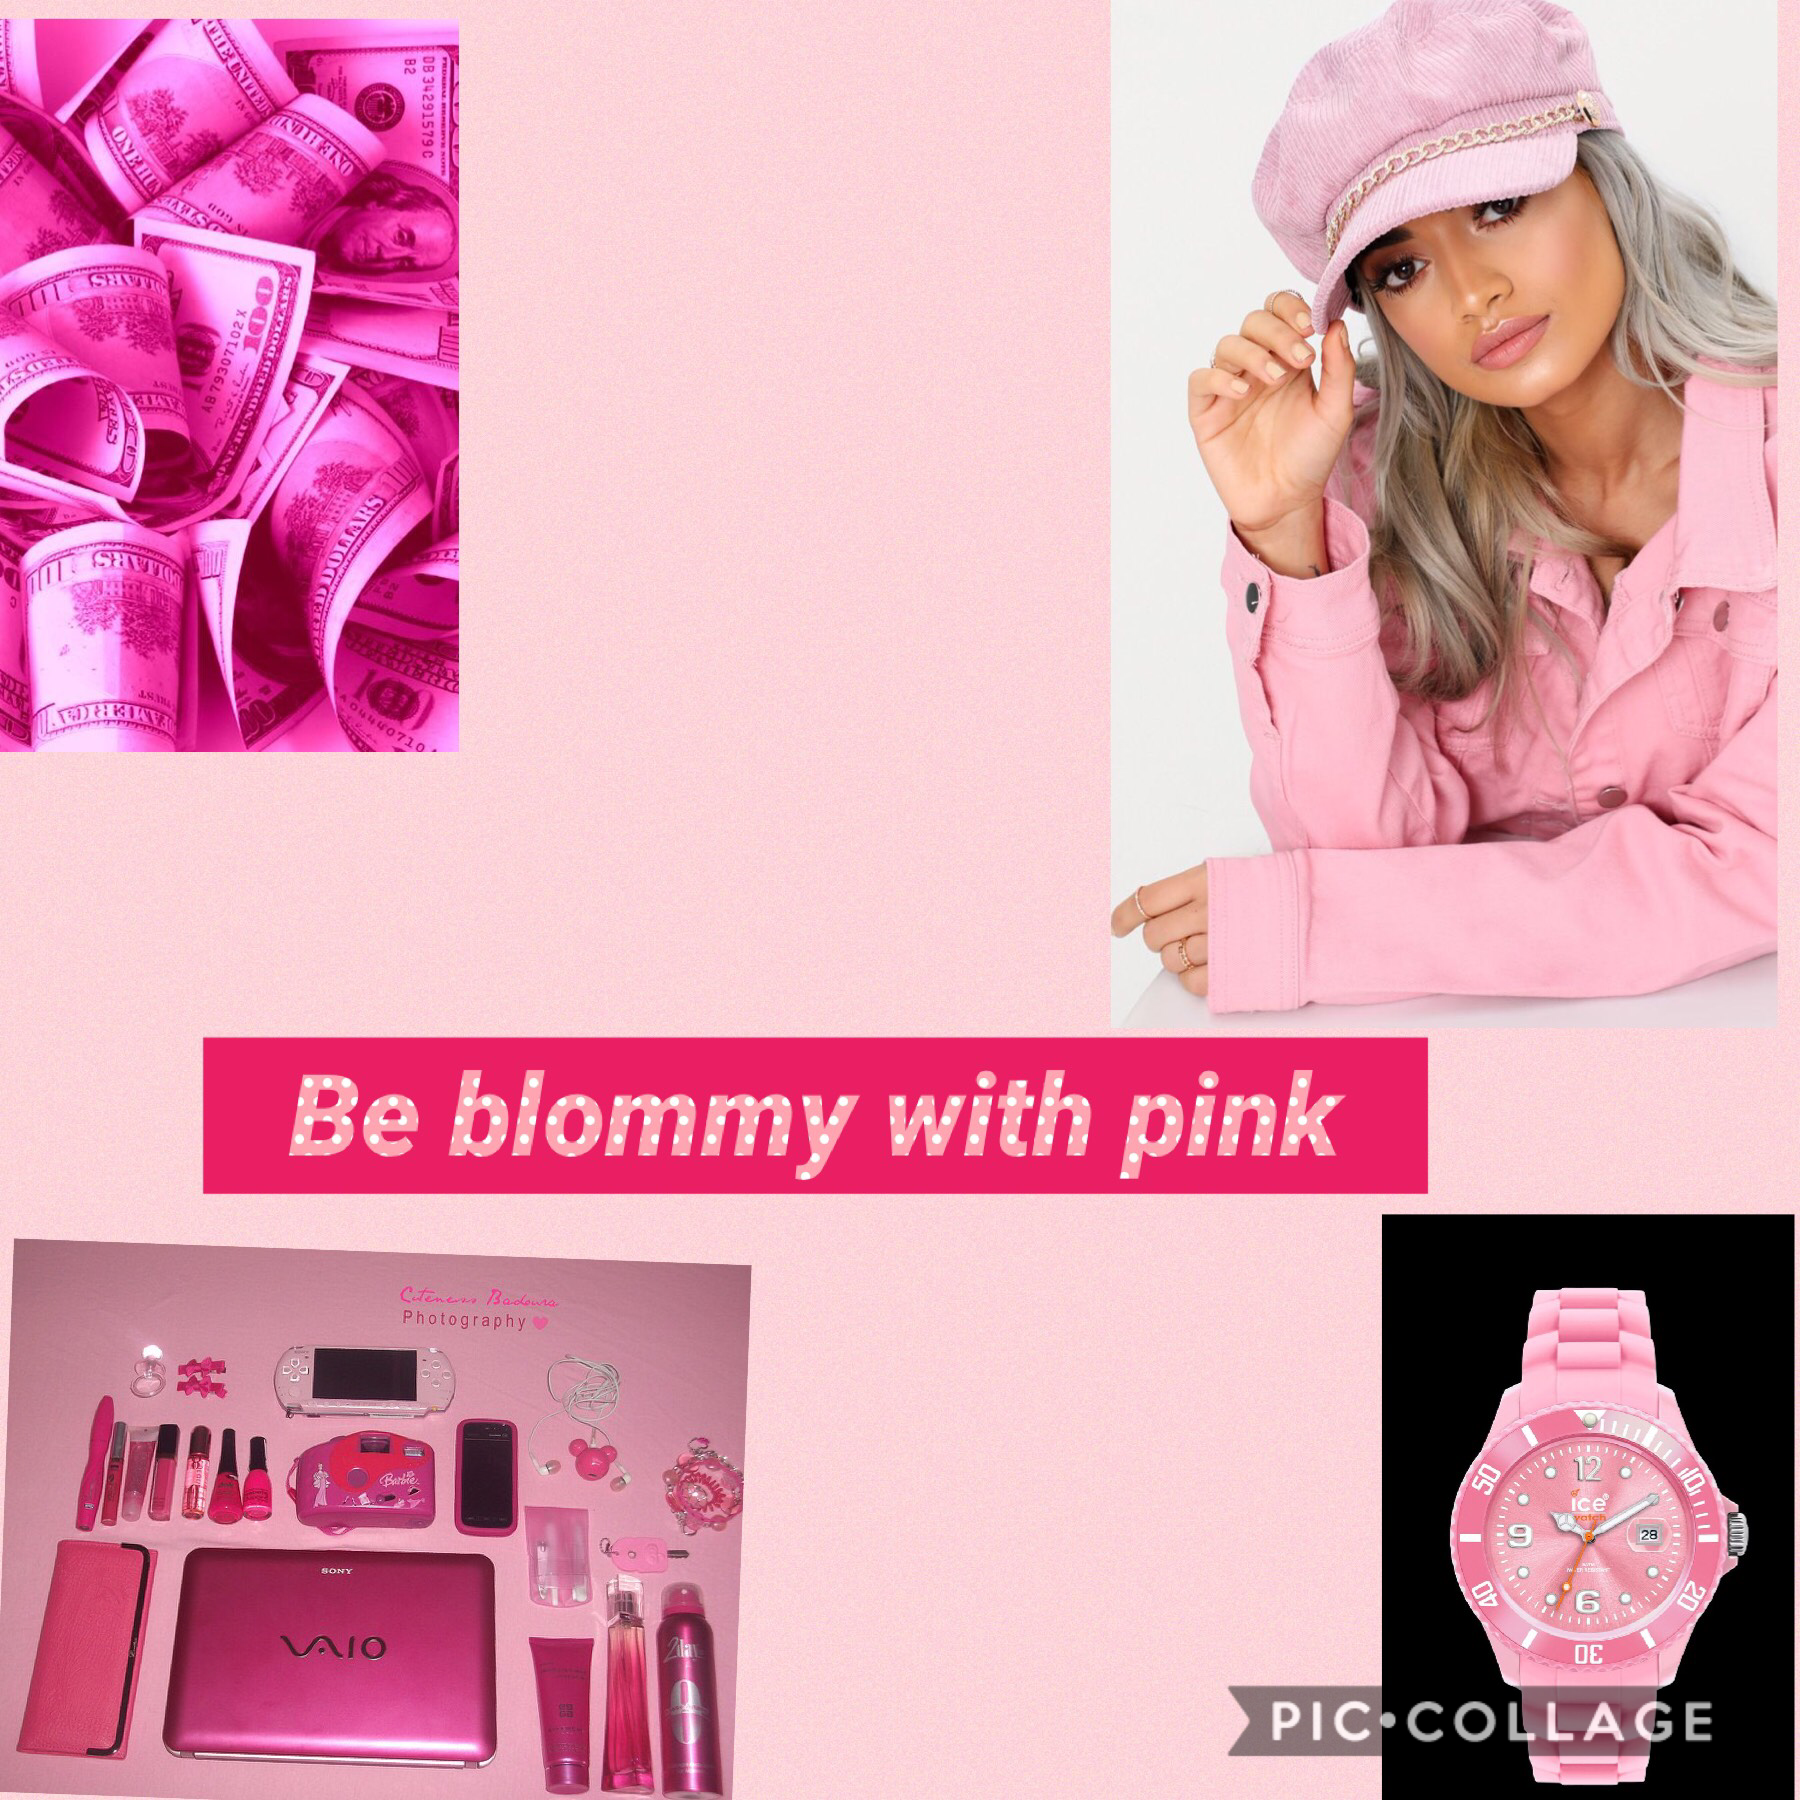 Be blommy with pink